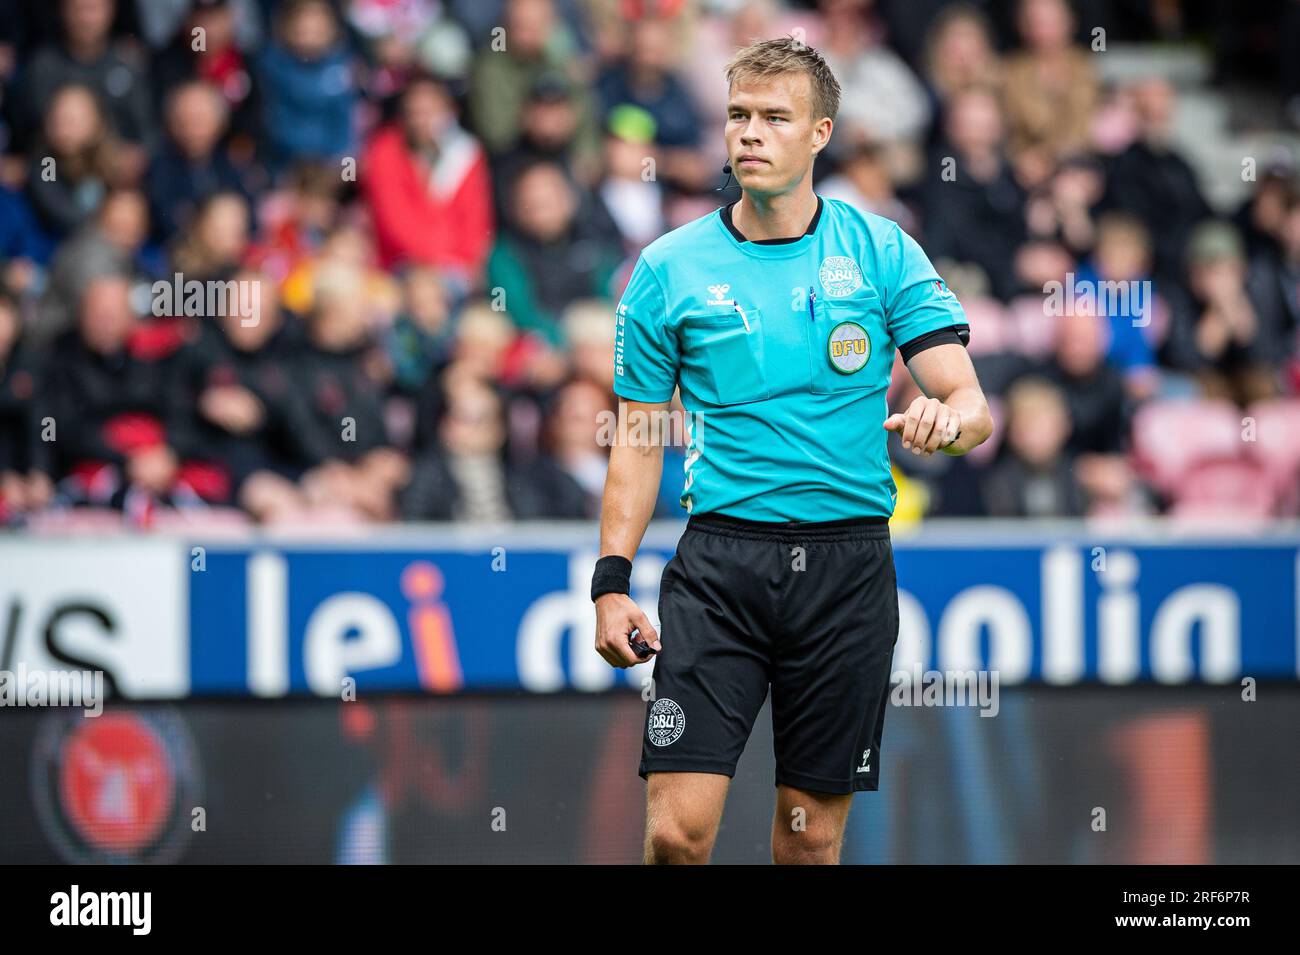 Herning, Denmark. 30th, July 2023. Referee Jacob Karlsen seen during the 3F Superliga match between FC Midtjylland and Silkeborg IF at MCH Arena in Herning. (Photo credit: Gonzales Photo - Morten Kjaer). Stock Photo